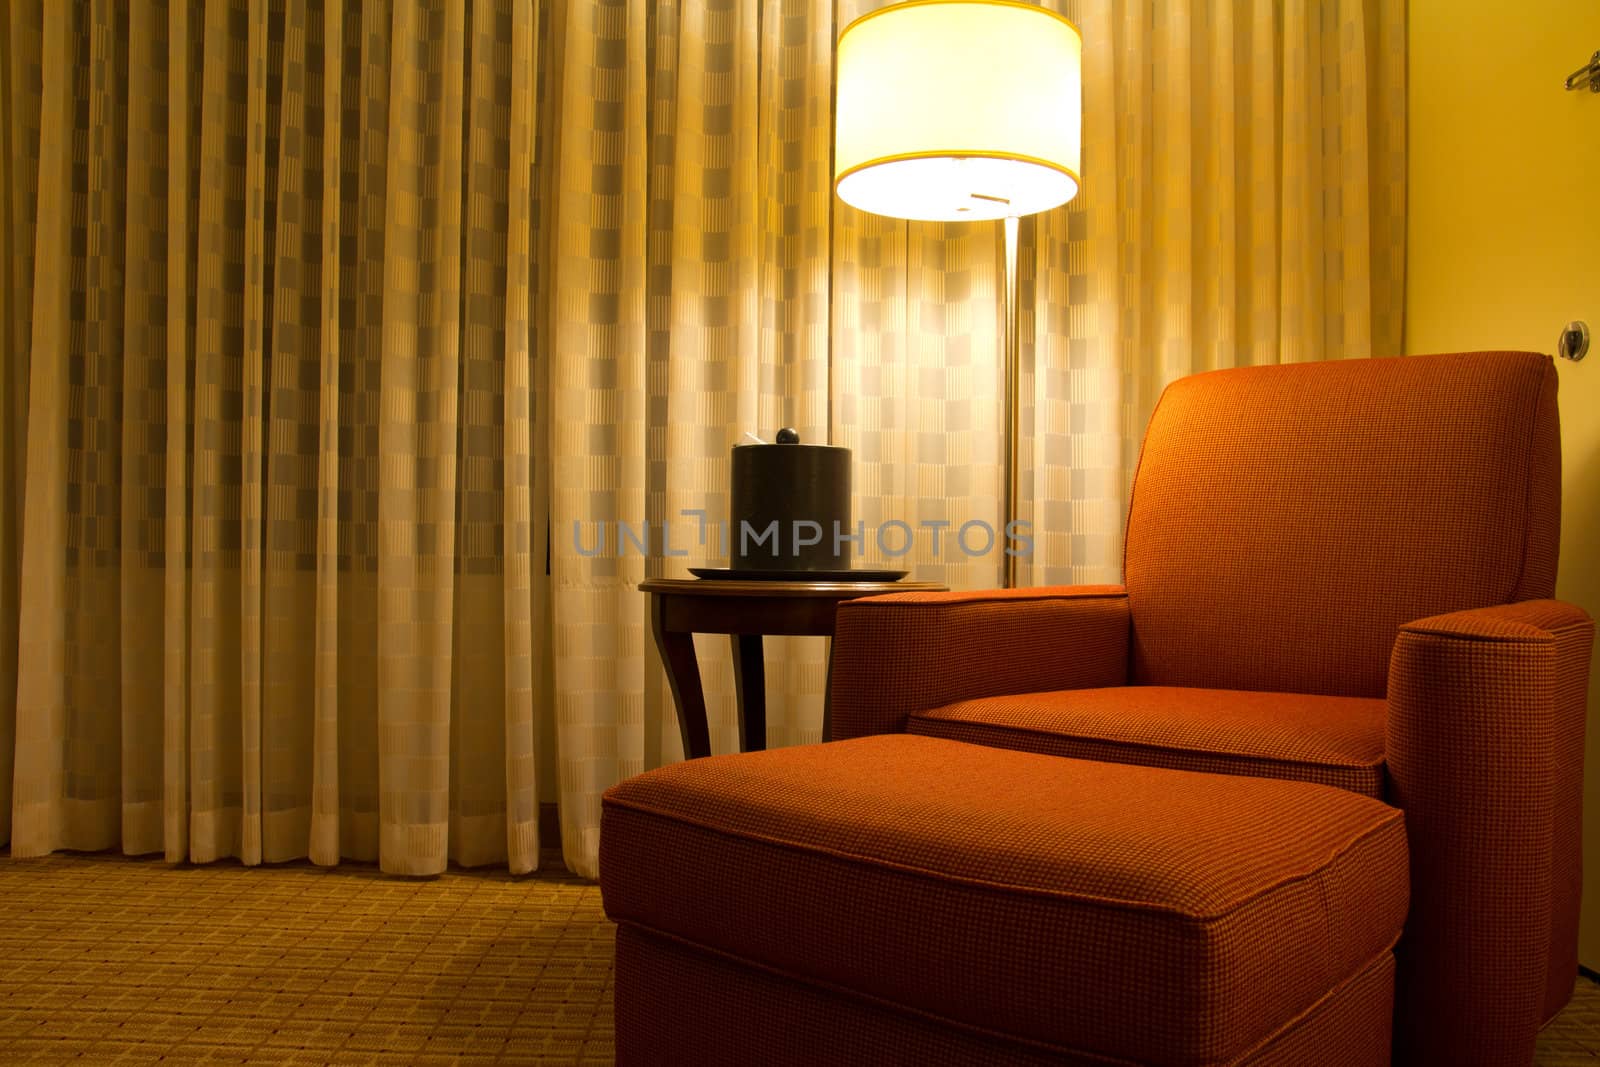 Armchair in a corner of hotel room